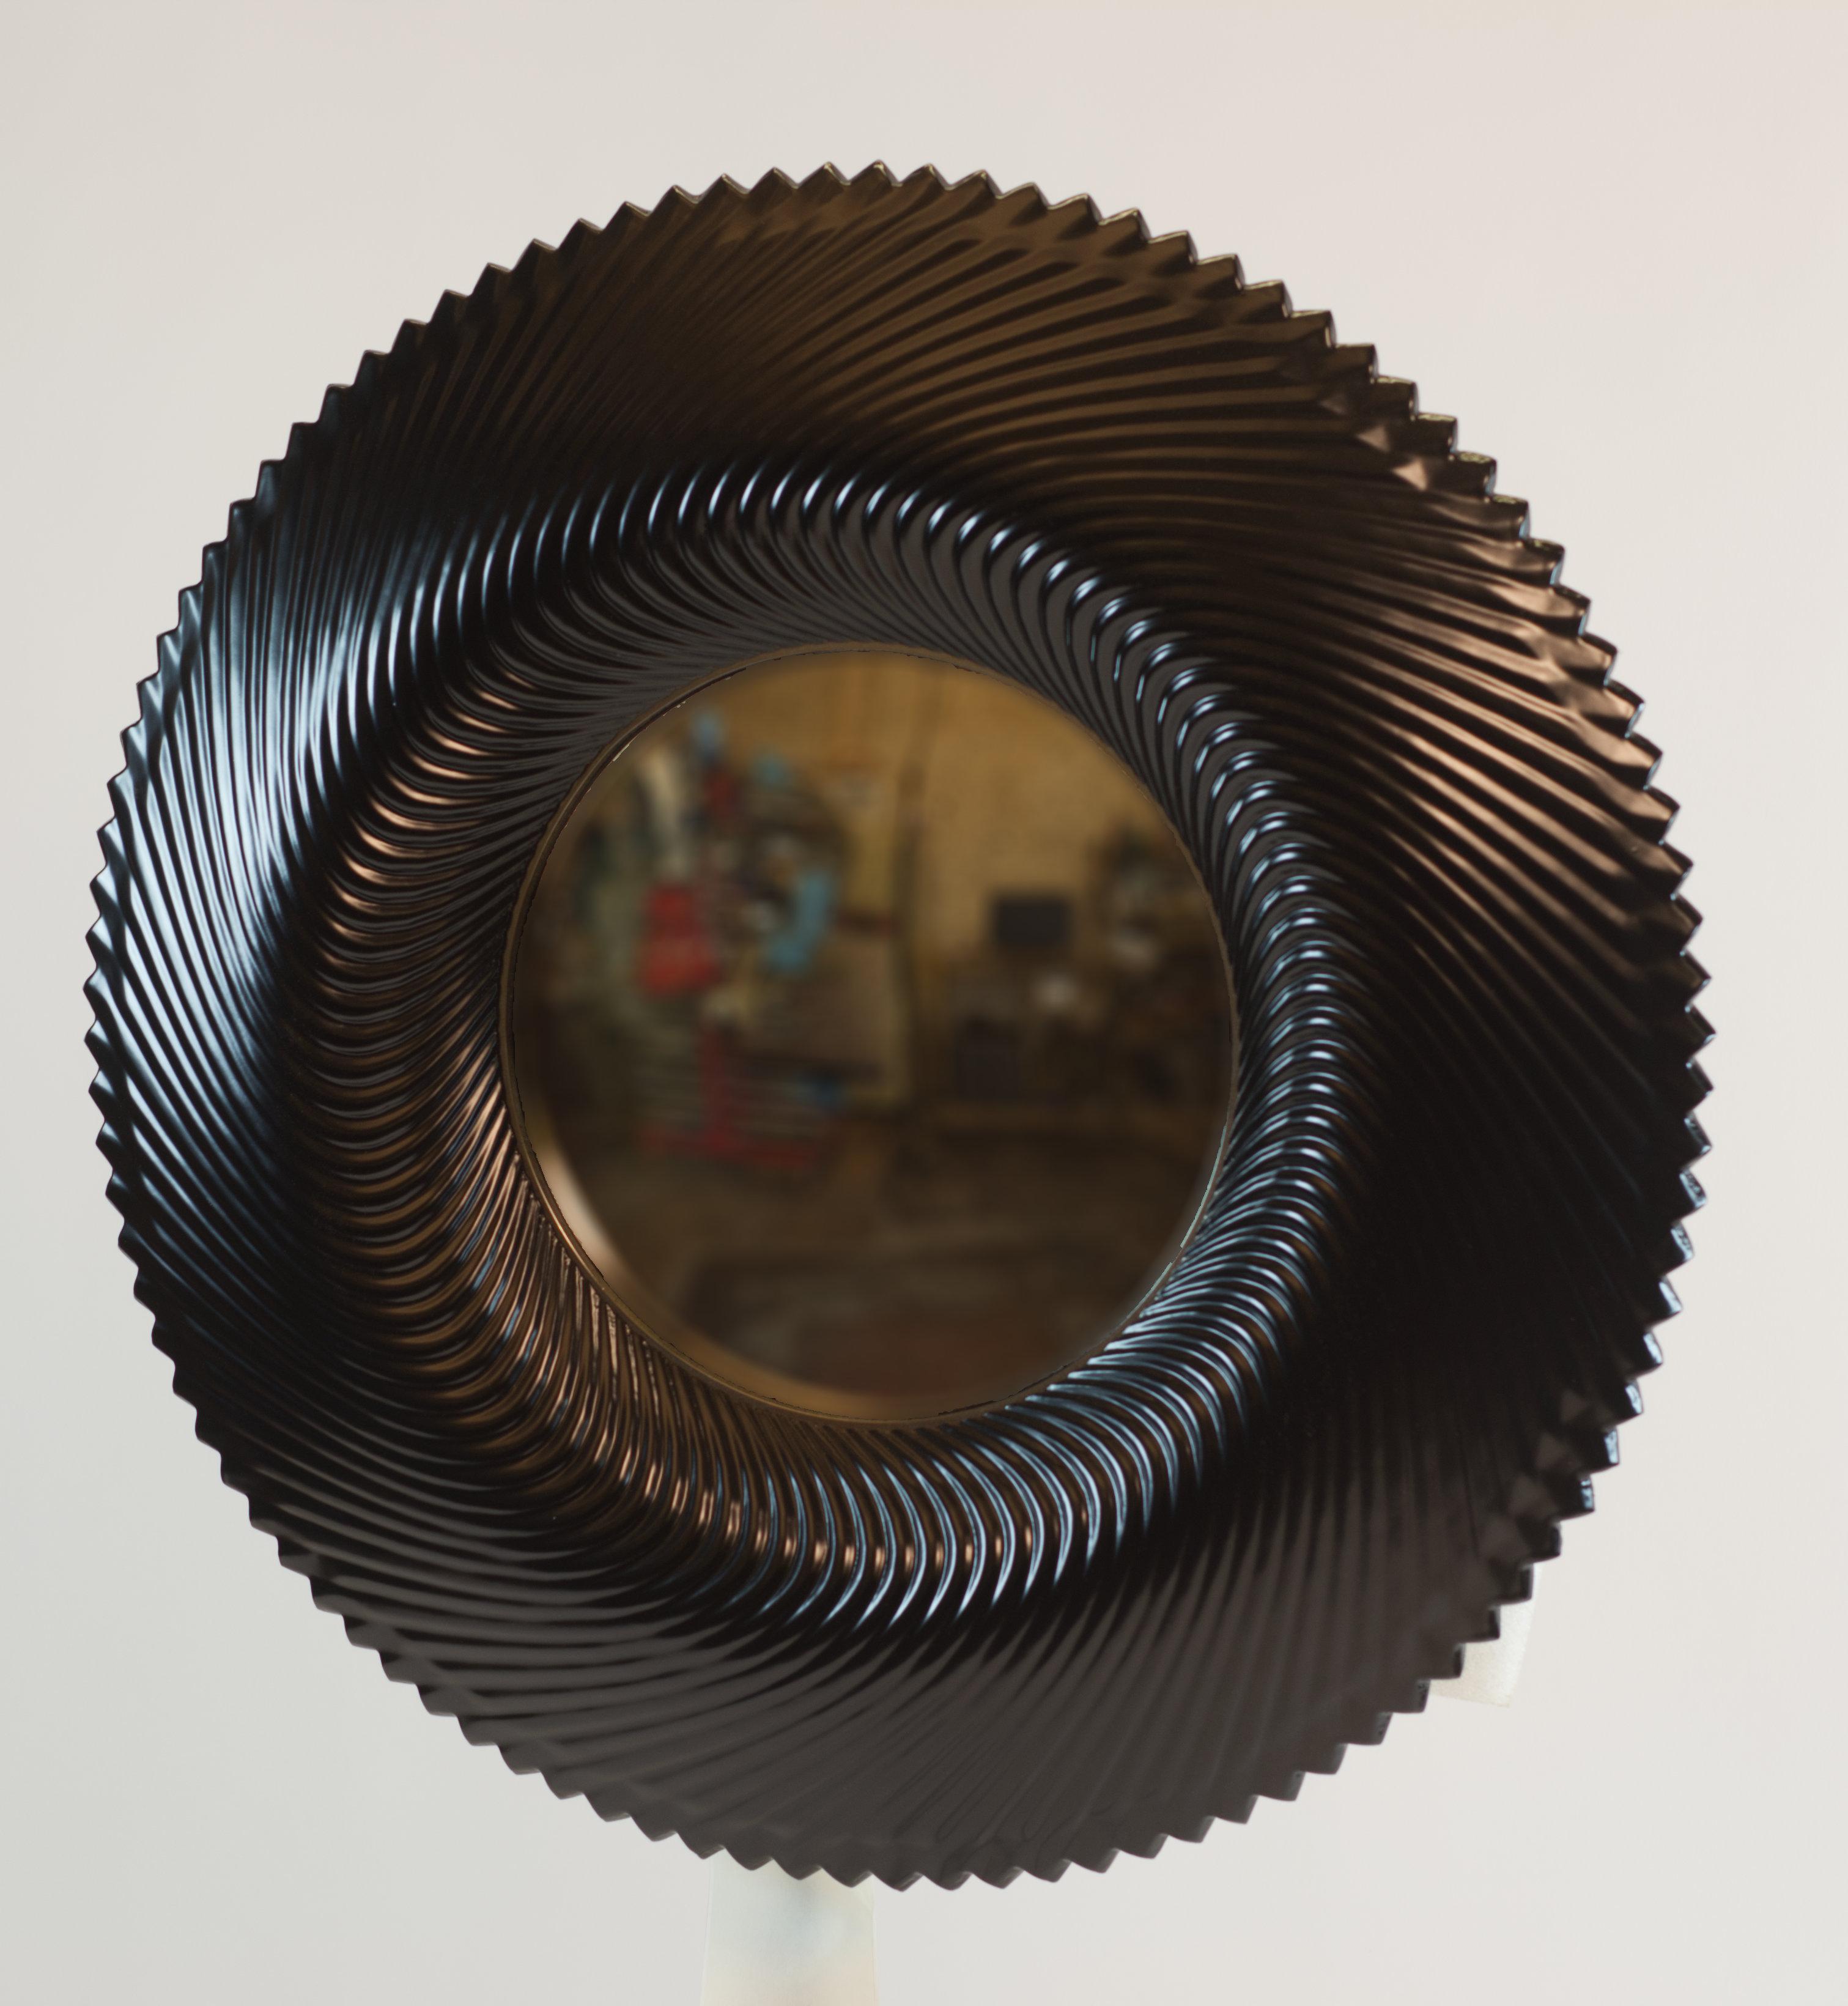 Surrealistic sculptural convex mirror by Roman Erlikh Studio. Convex mirror is acid treated and back-glazed using black and gold colors, and the mirror is accentuated by a nickel plated metal trim. Various multilayered varnishes in different color